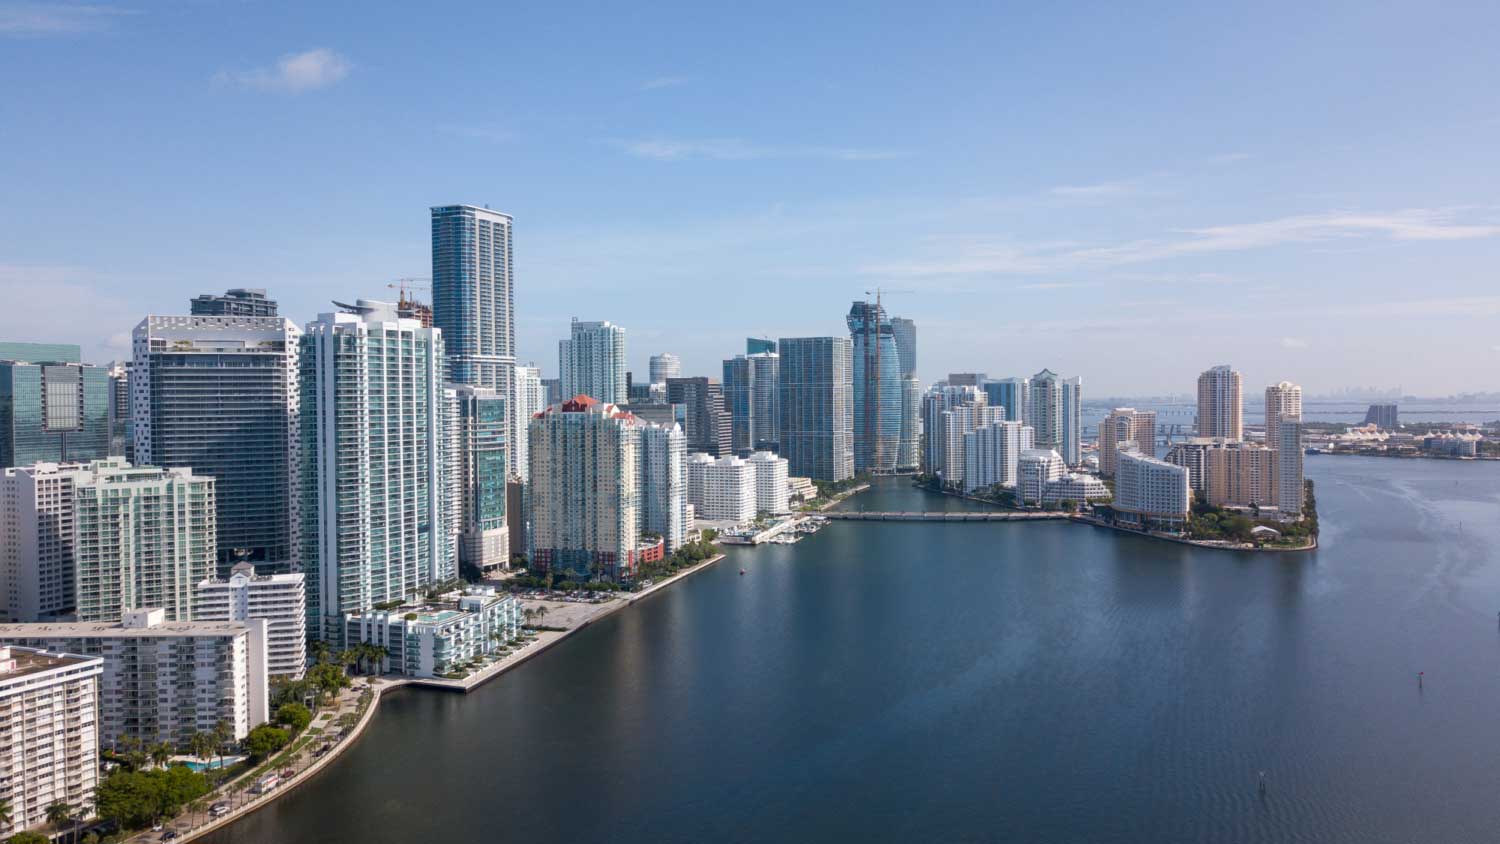 Brickell Commercial Real Estate